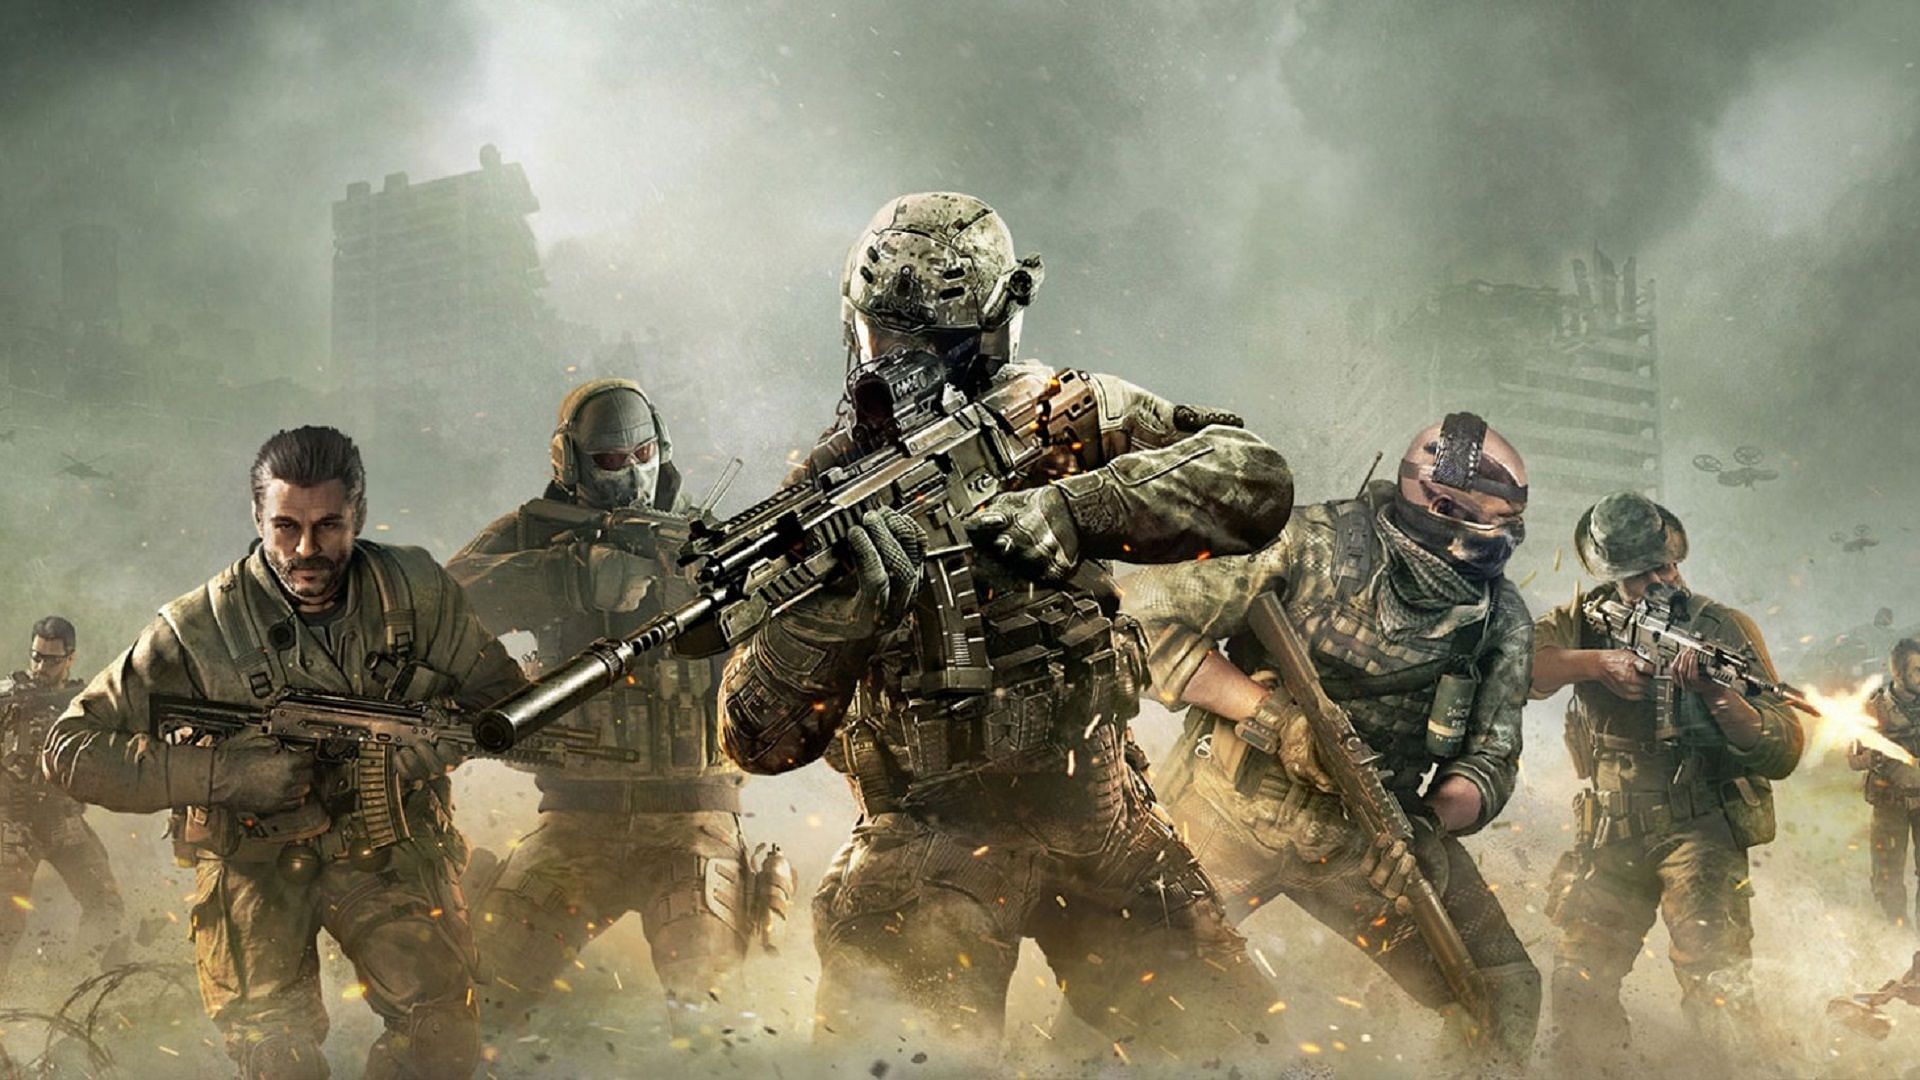 Call of Duty Mobile redeem codes 2020, new cod mobile code that work